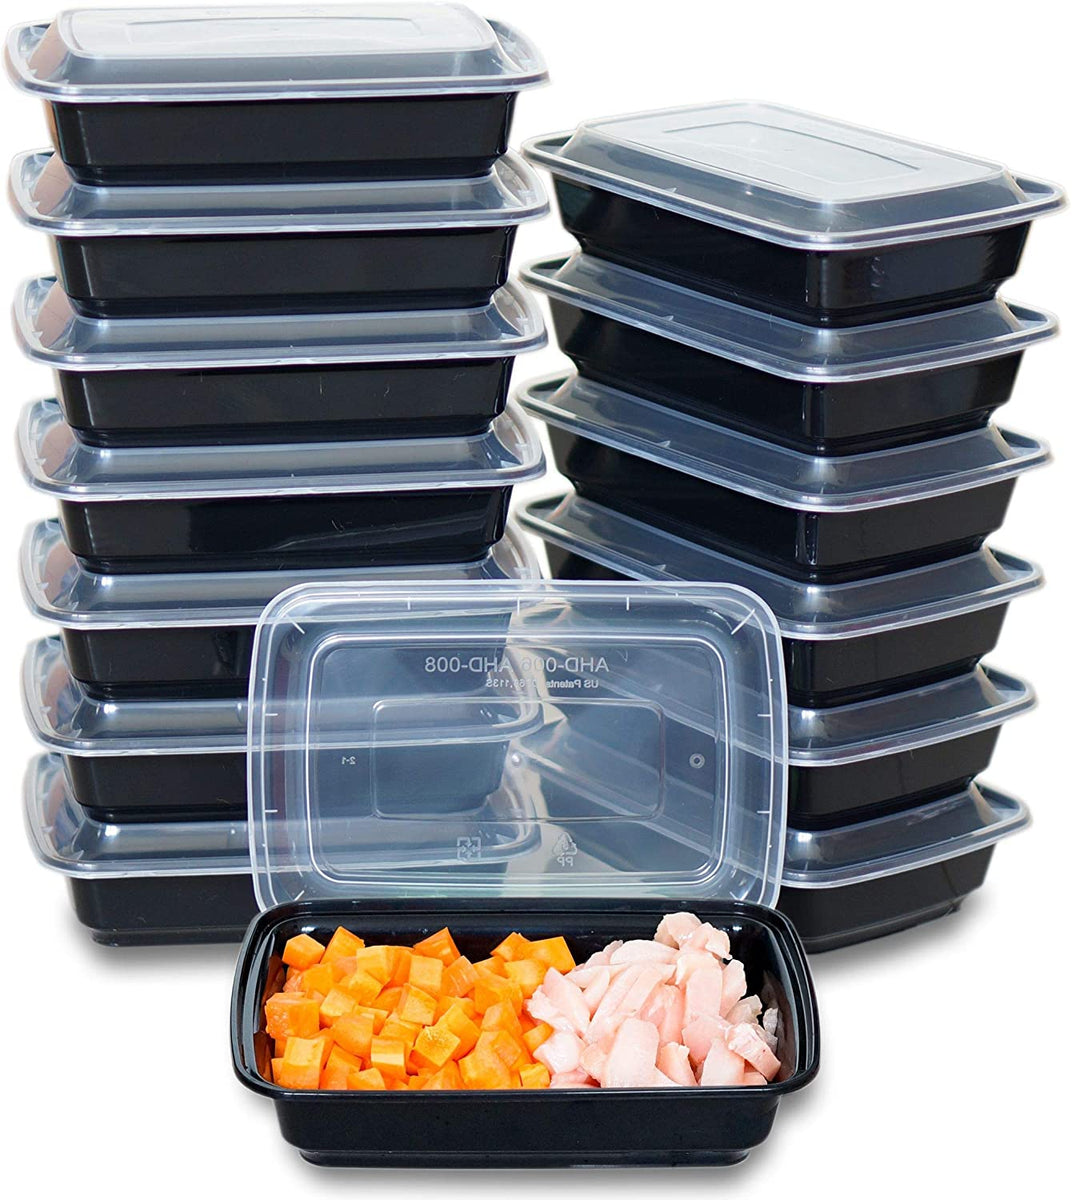 50 Pack Meal Prep 38 oz Containers Reusable Food Storage Plastic